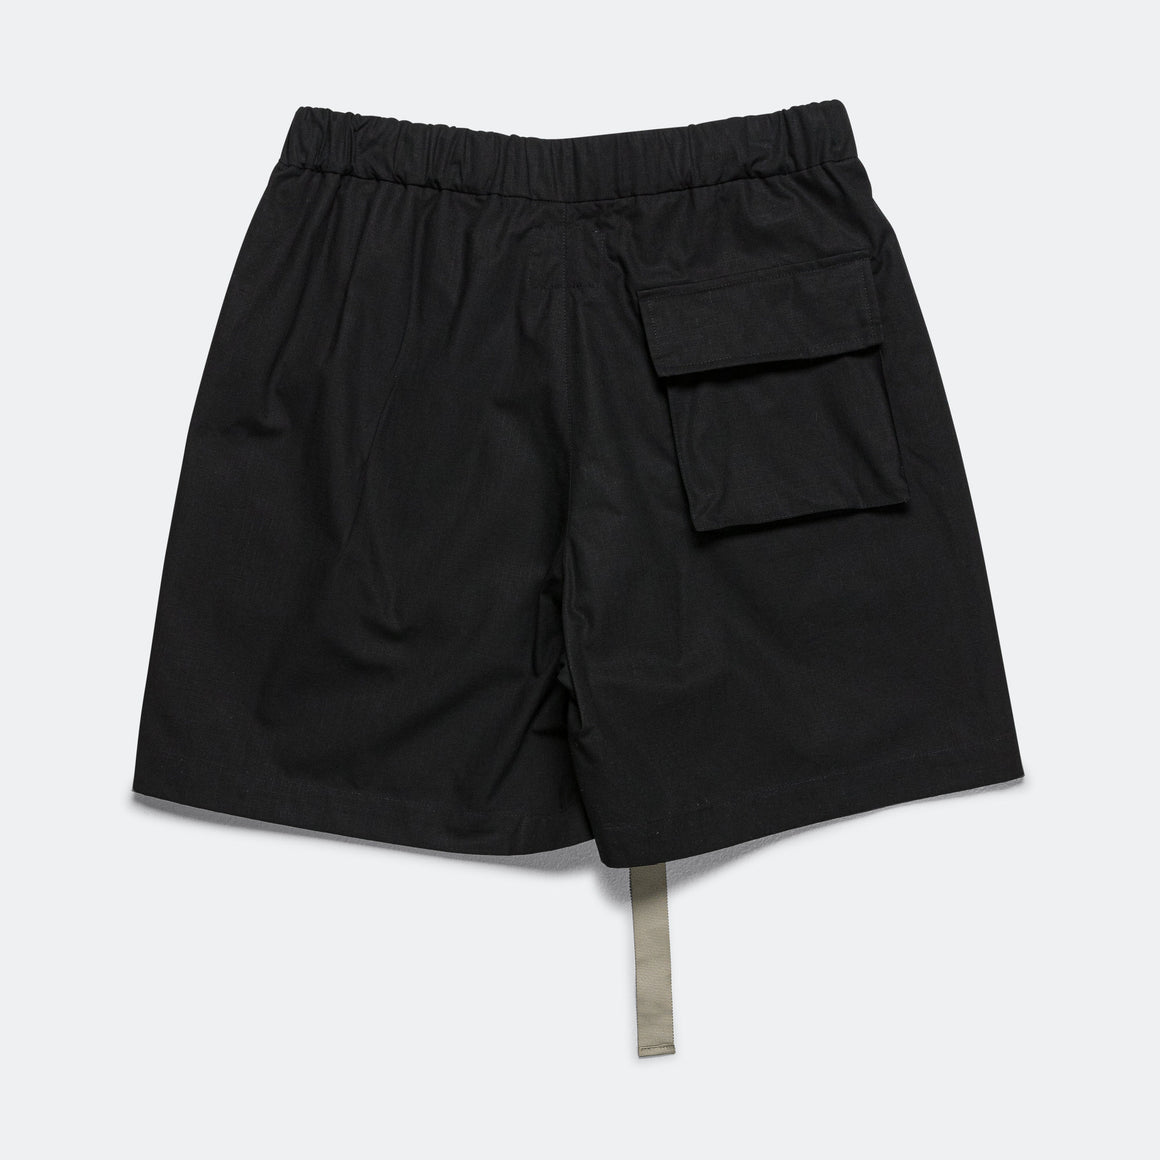 For The Homies - DOOM Fatigue Short - Black - UP THERE